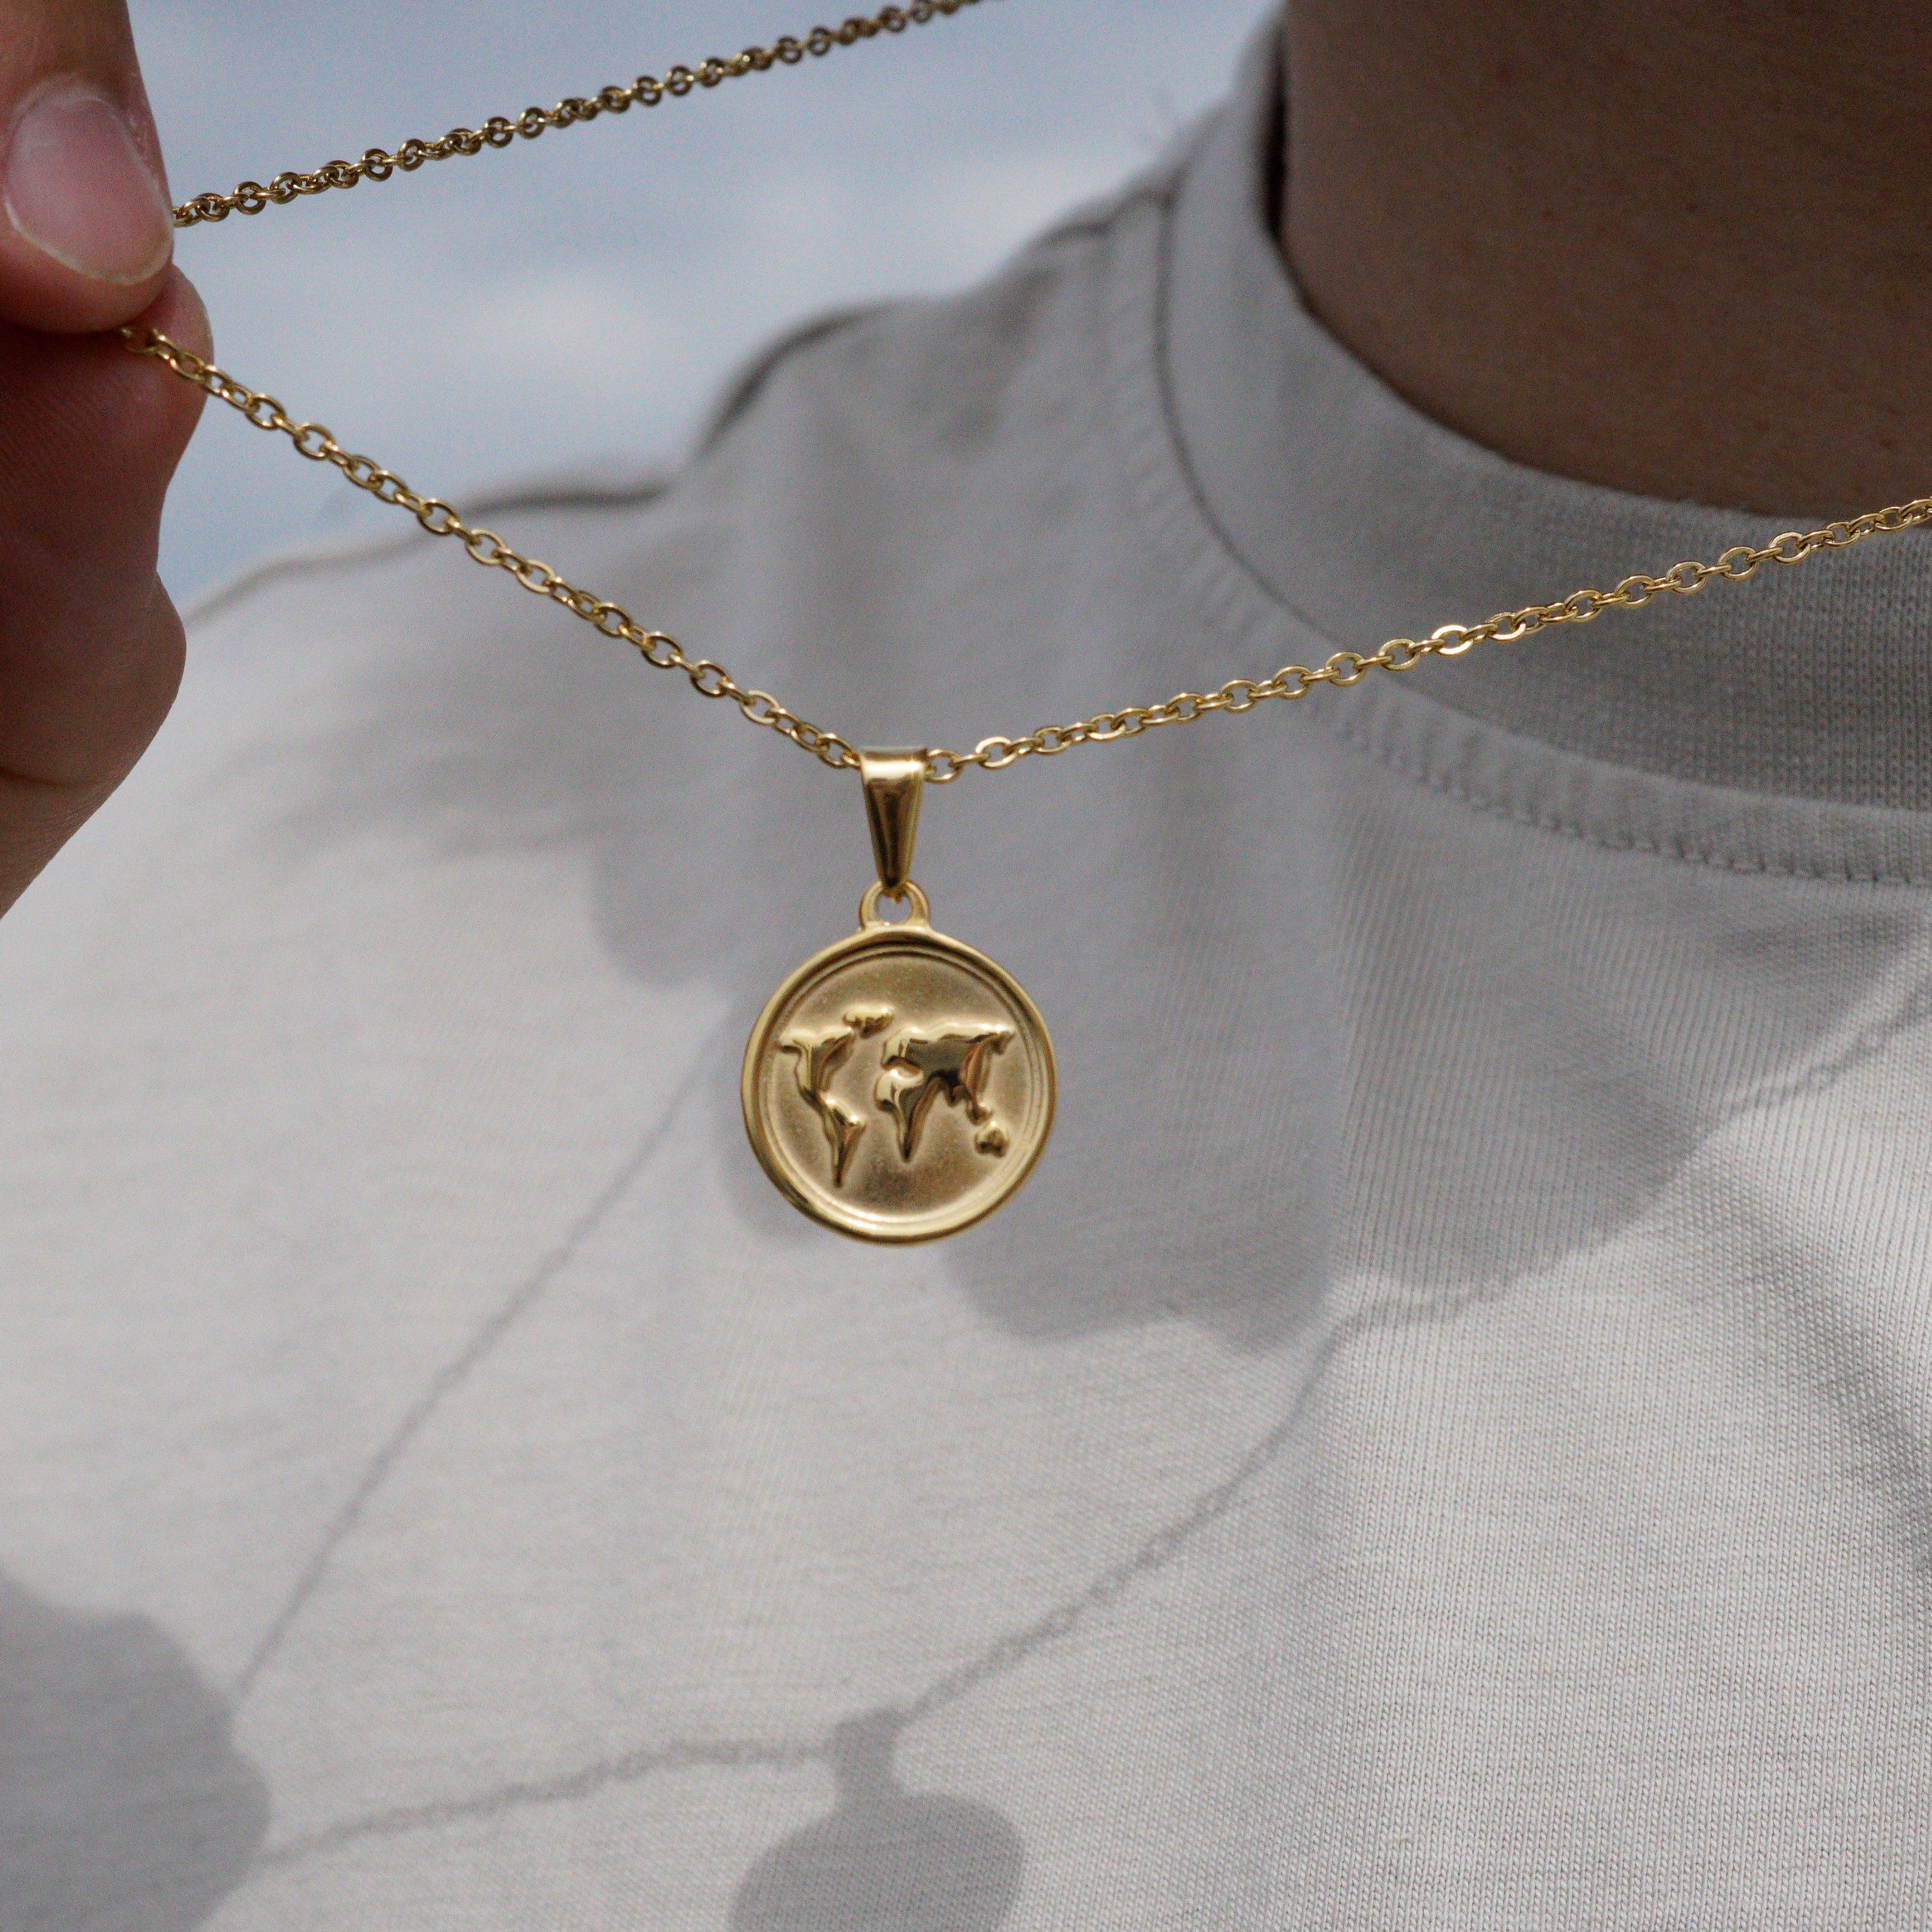 WORLD NECKLACE - GOLD